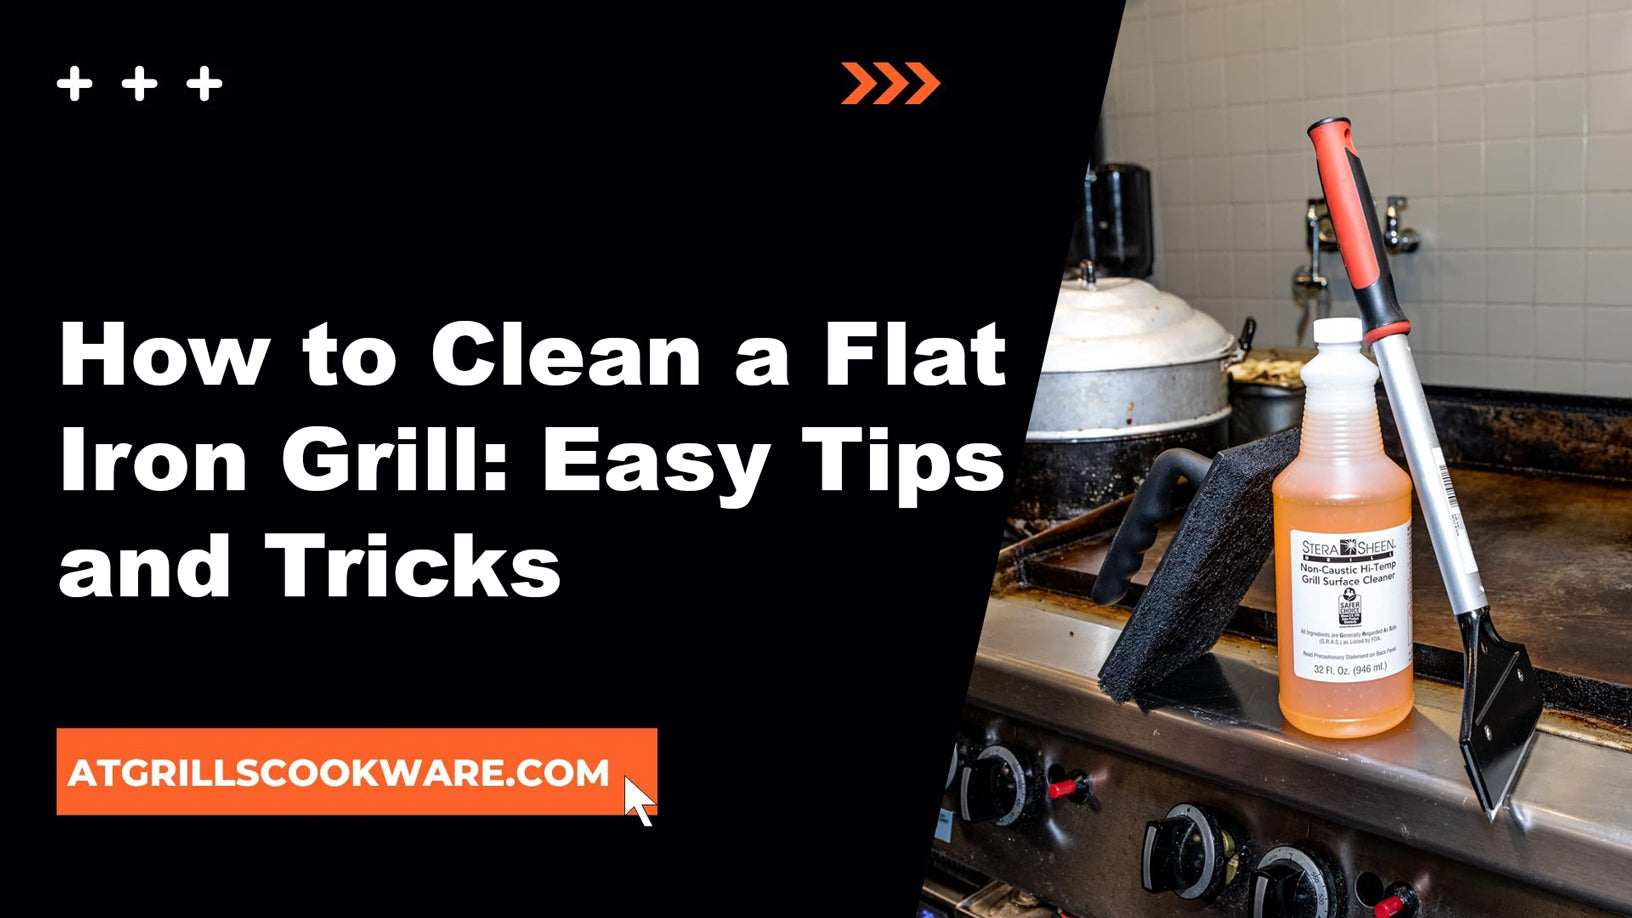 How to Clean a Flat Iron Grill: Easy Tips and Tricks